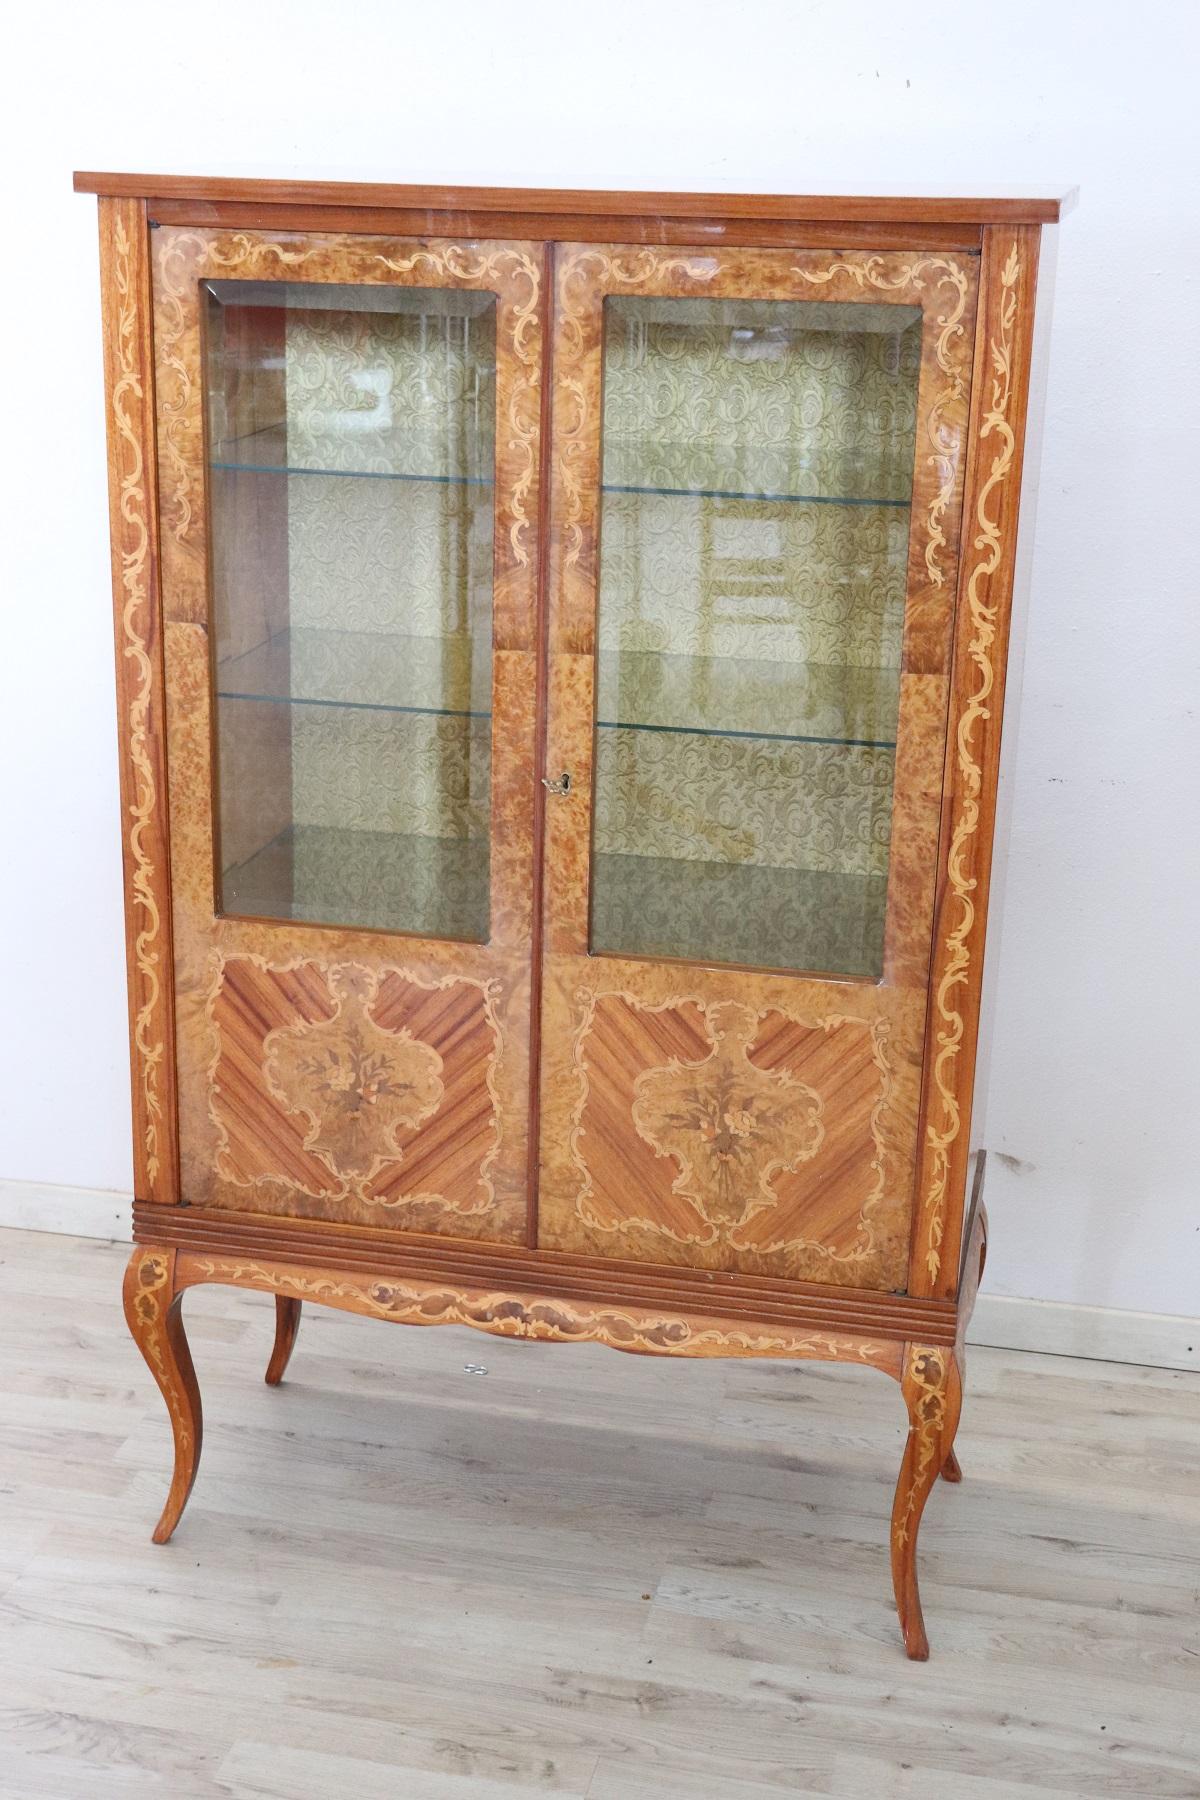 Elegant Italian vitrine in Louis XV style. Characterized by a refined inlay work with many different precious woods. Floral taste decoration. Interior lined with elegant fabric. This vitrine is perfect for displaying your precious objects. Excellent